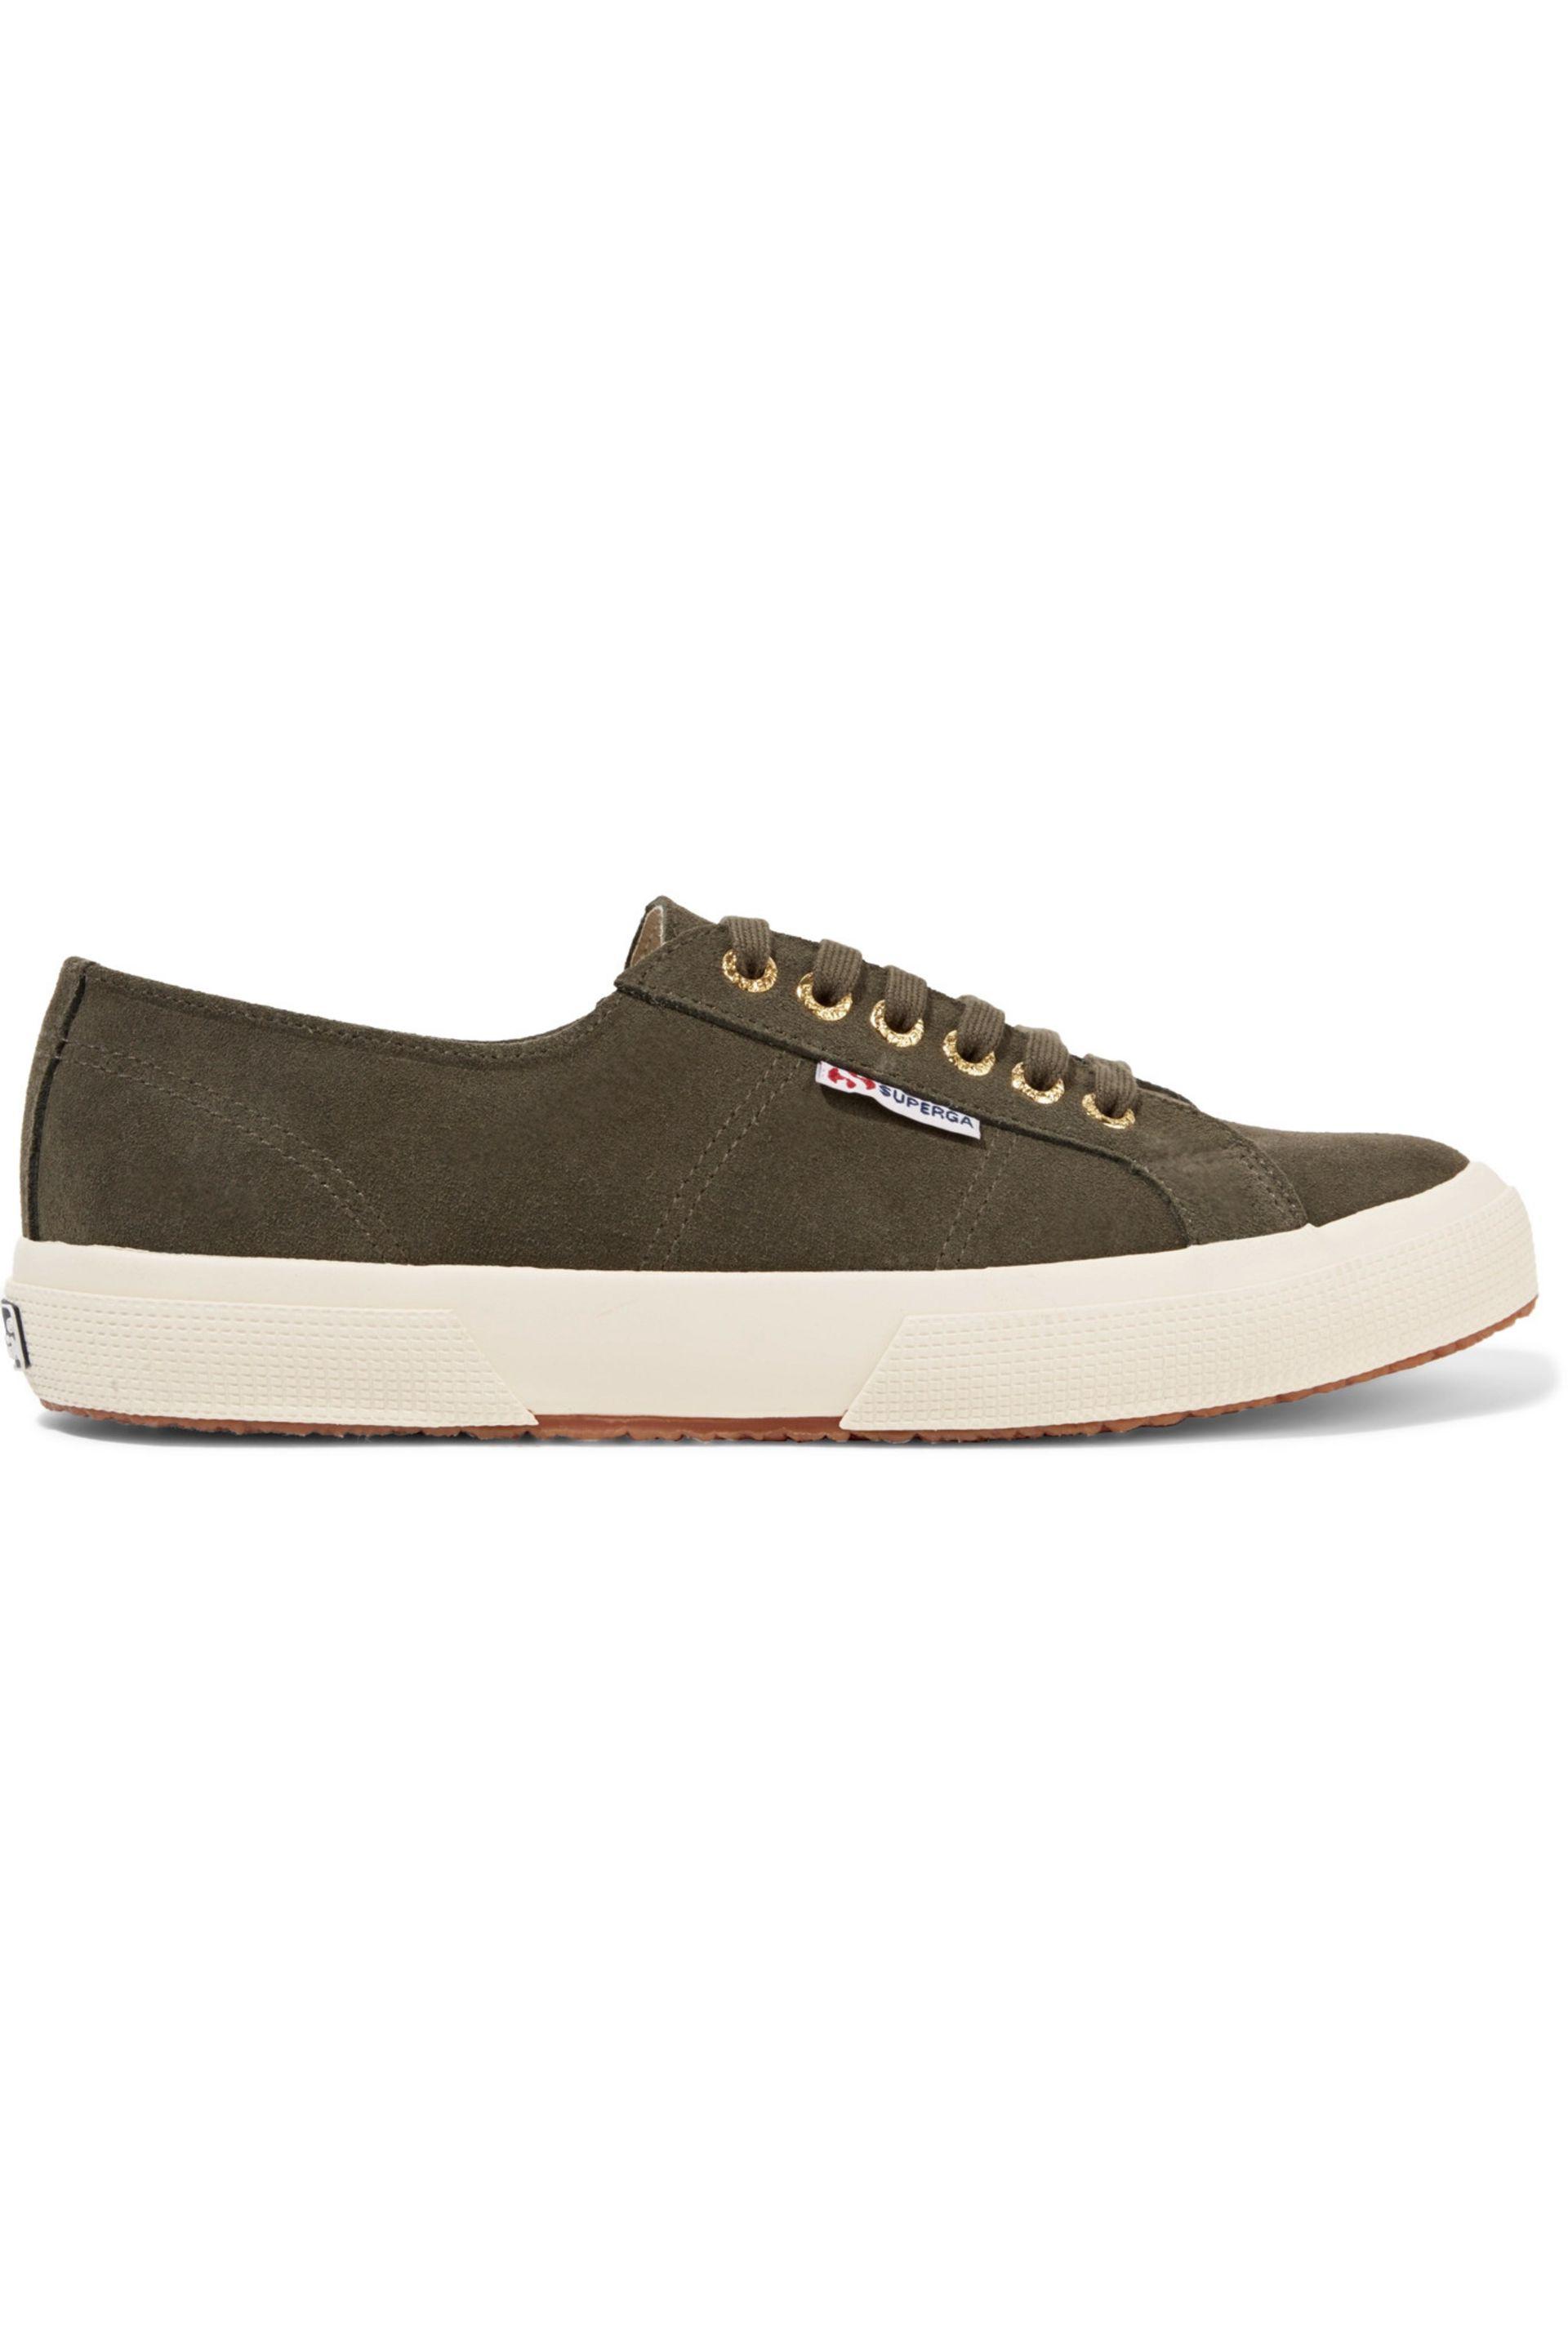 Superga Suede Sneakers Army Green - Lyst